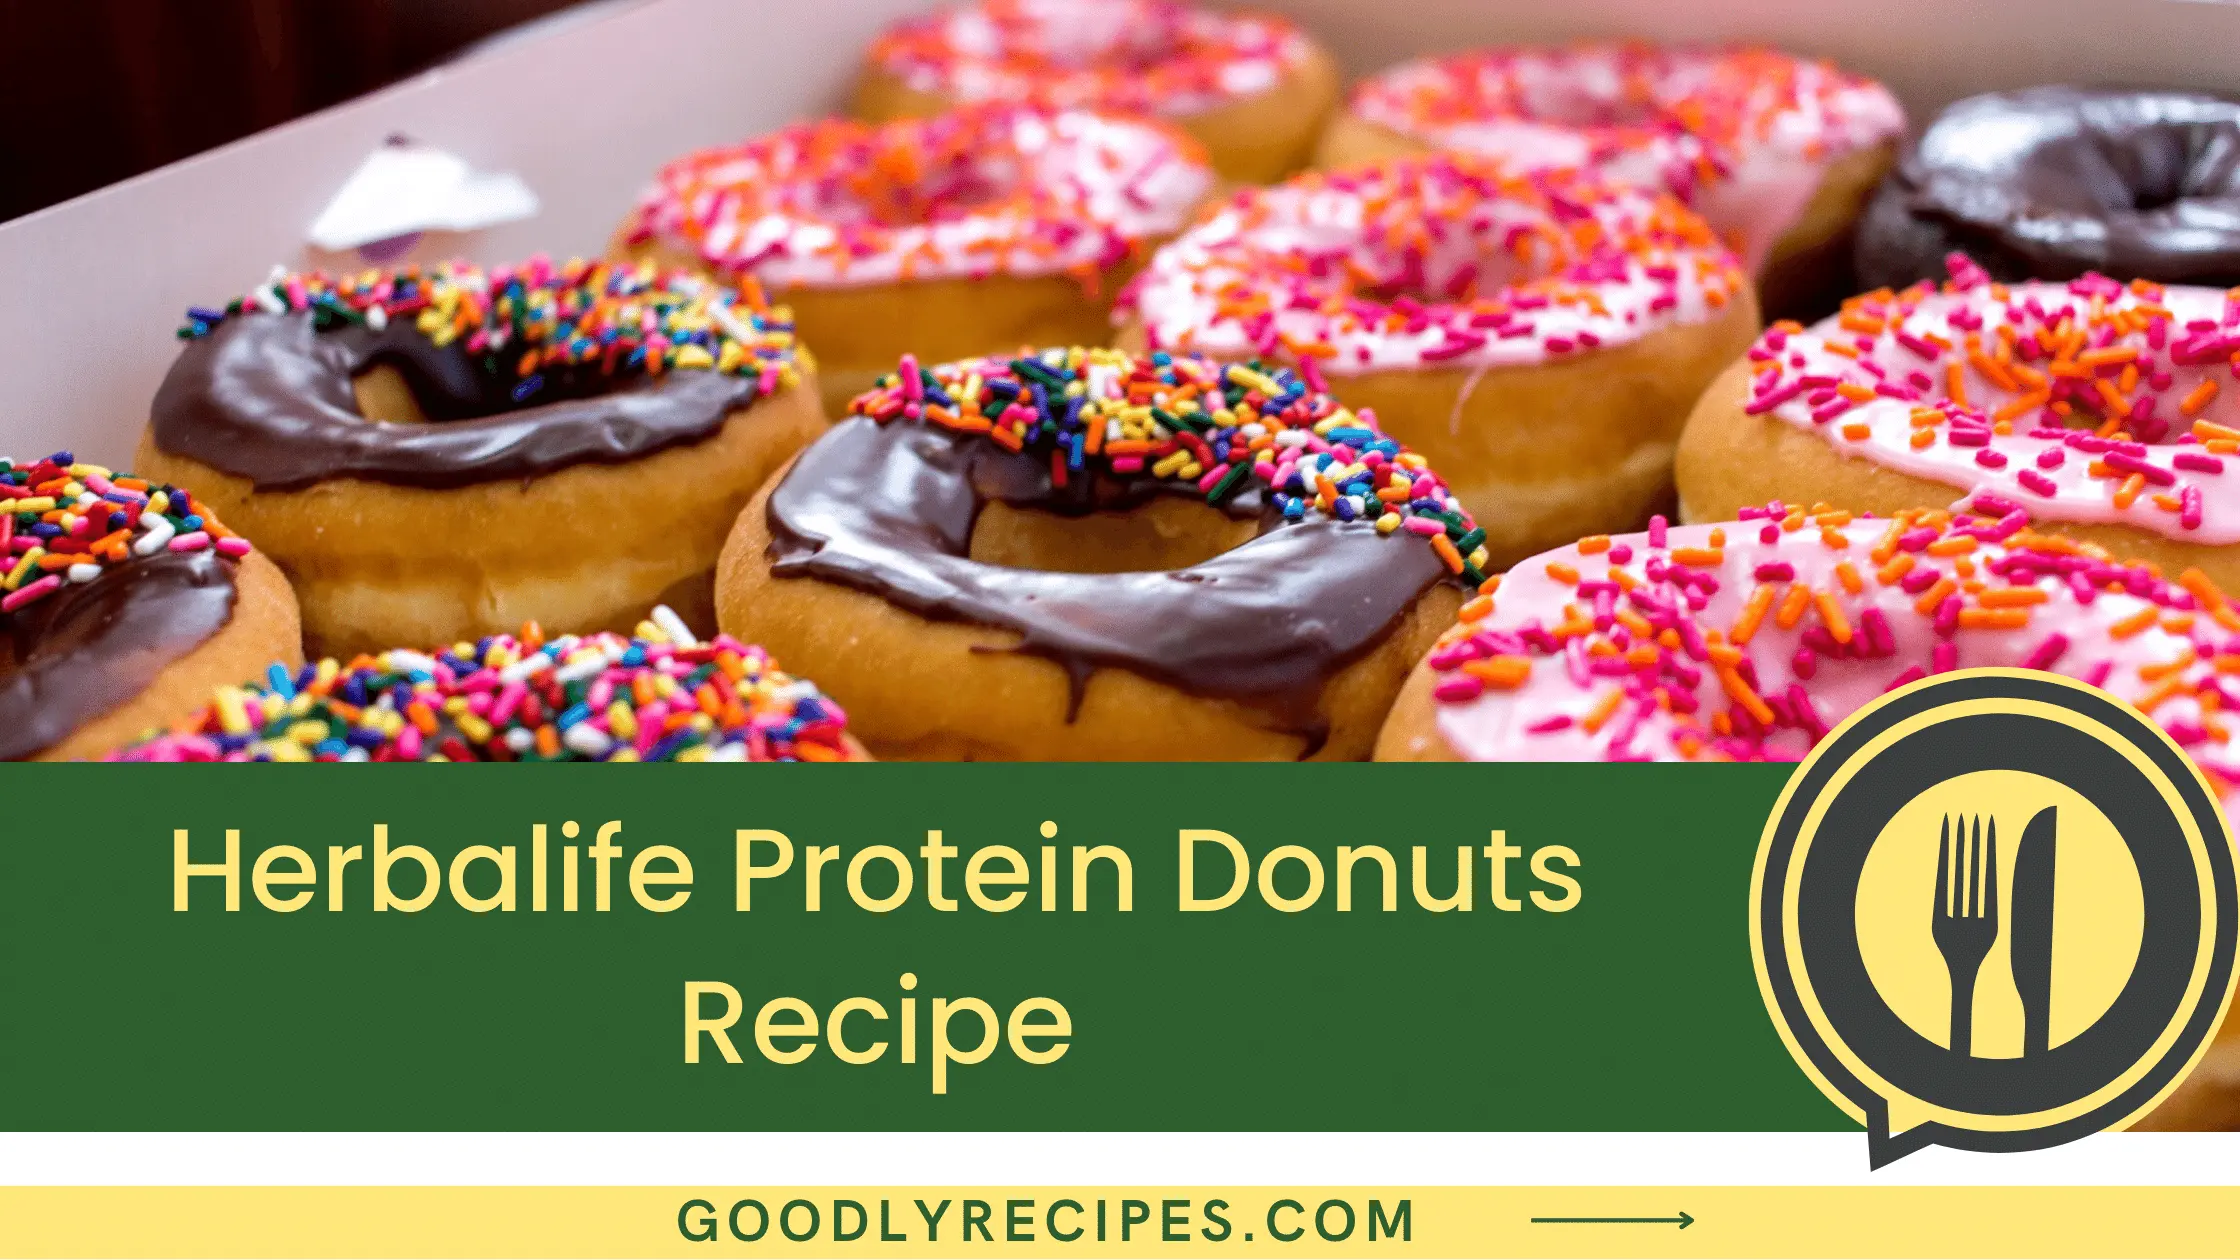 What is Herbalife Protein Donuts?